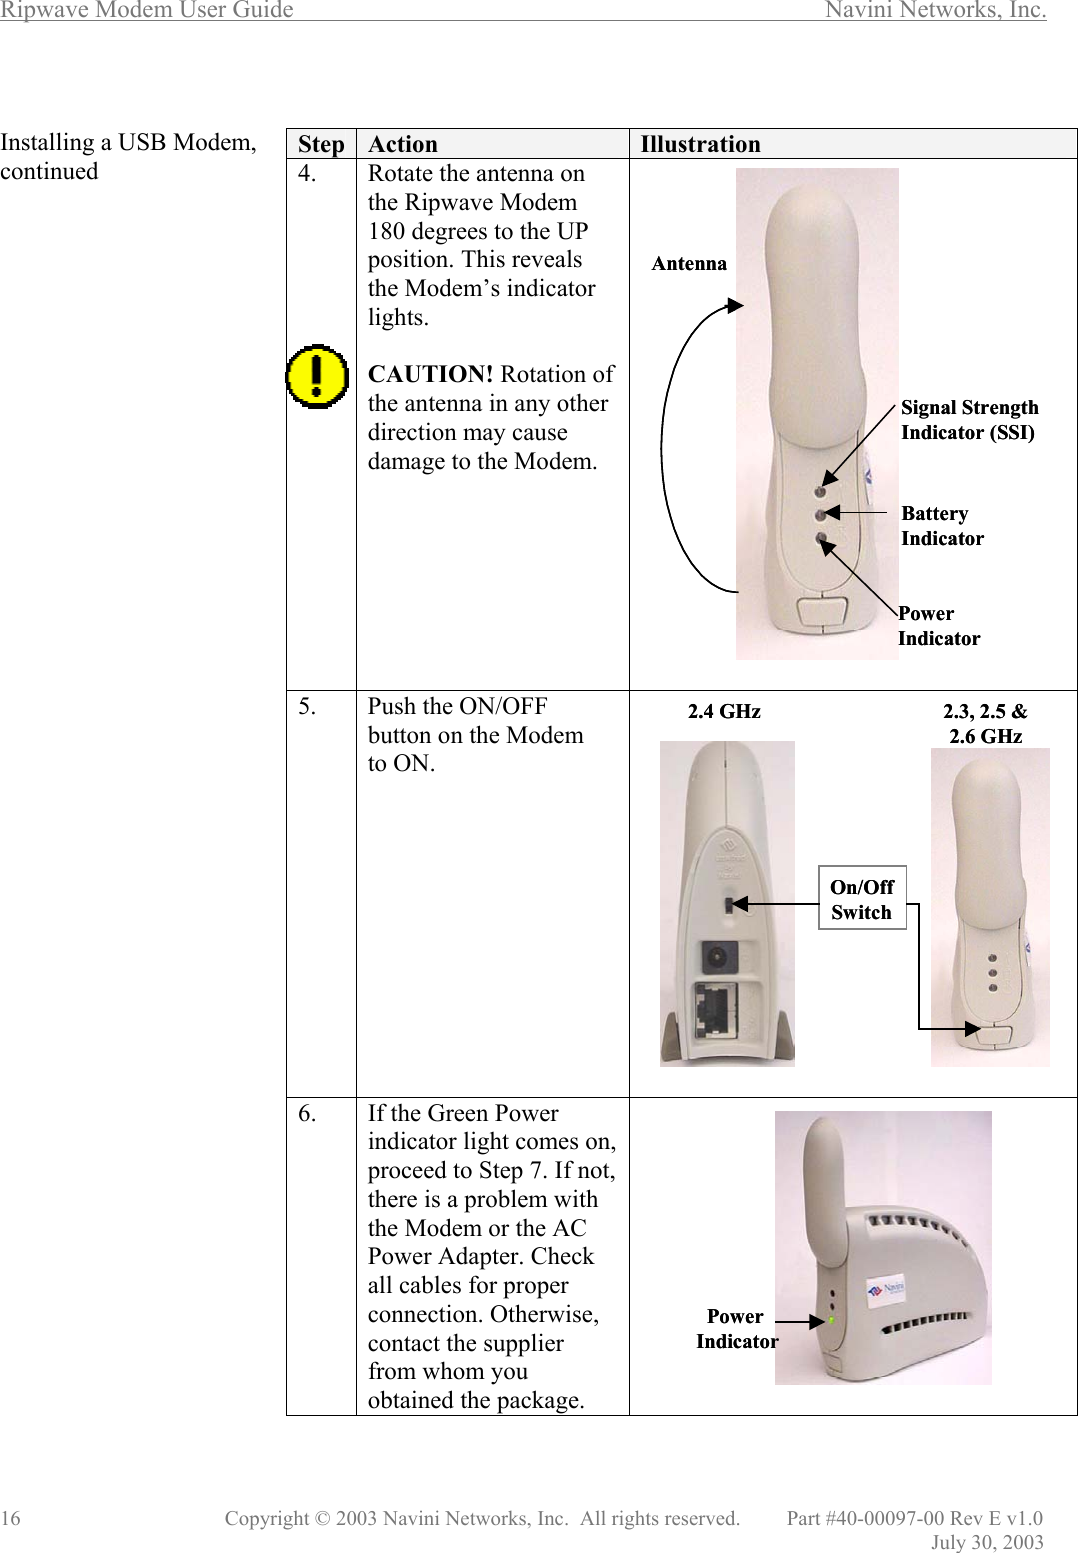 Ripwave Modem User Guide        Navini Networks, Inc. 16      Copyright © 2003 Navini Networks, Inc.  All rights reserved.         Part #40-00097-00 Rev E v1.0                   July 30, 2003  Installing a USB Modem, continued                                             Step  Action  Illustration 4.  Rotate the antenna on the Ripwave Modem 180 degrees to the UP position. This reveals the Modem’s indicator lights.  CAUTION! Rotation of the antenna in any other direction may cause damage to the Modem.   5.  Push the ON/OFF button on the Modem  to ON.  6.  If the Green Power indicator light comes on, proceed to Step 7. If not, there is a problem with the Modem or the AC Power Adapter. Check all cables for proper connection. Otherwise, contact the supplier from whom you obtained the package.    Signal Strength Indicator (SSI)Power IndicatorBattery IndicatorAntennaSignal Strength Indicator (SSI)Power IndicatorBattery IndicatorAntennaOn/Off Switch2.4 GHz  2.3, 2.5 &amp;2.6 GHz On/Off Switch2.4 GHz  2.3, 2.5 &amp;2.6 GHz PowerIndicatorPowerIndicator